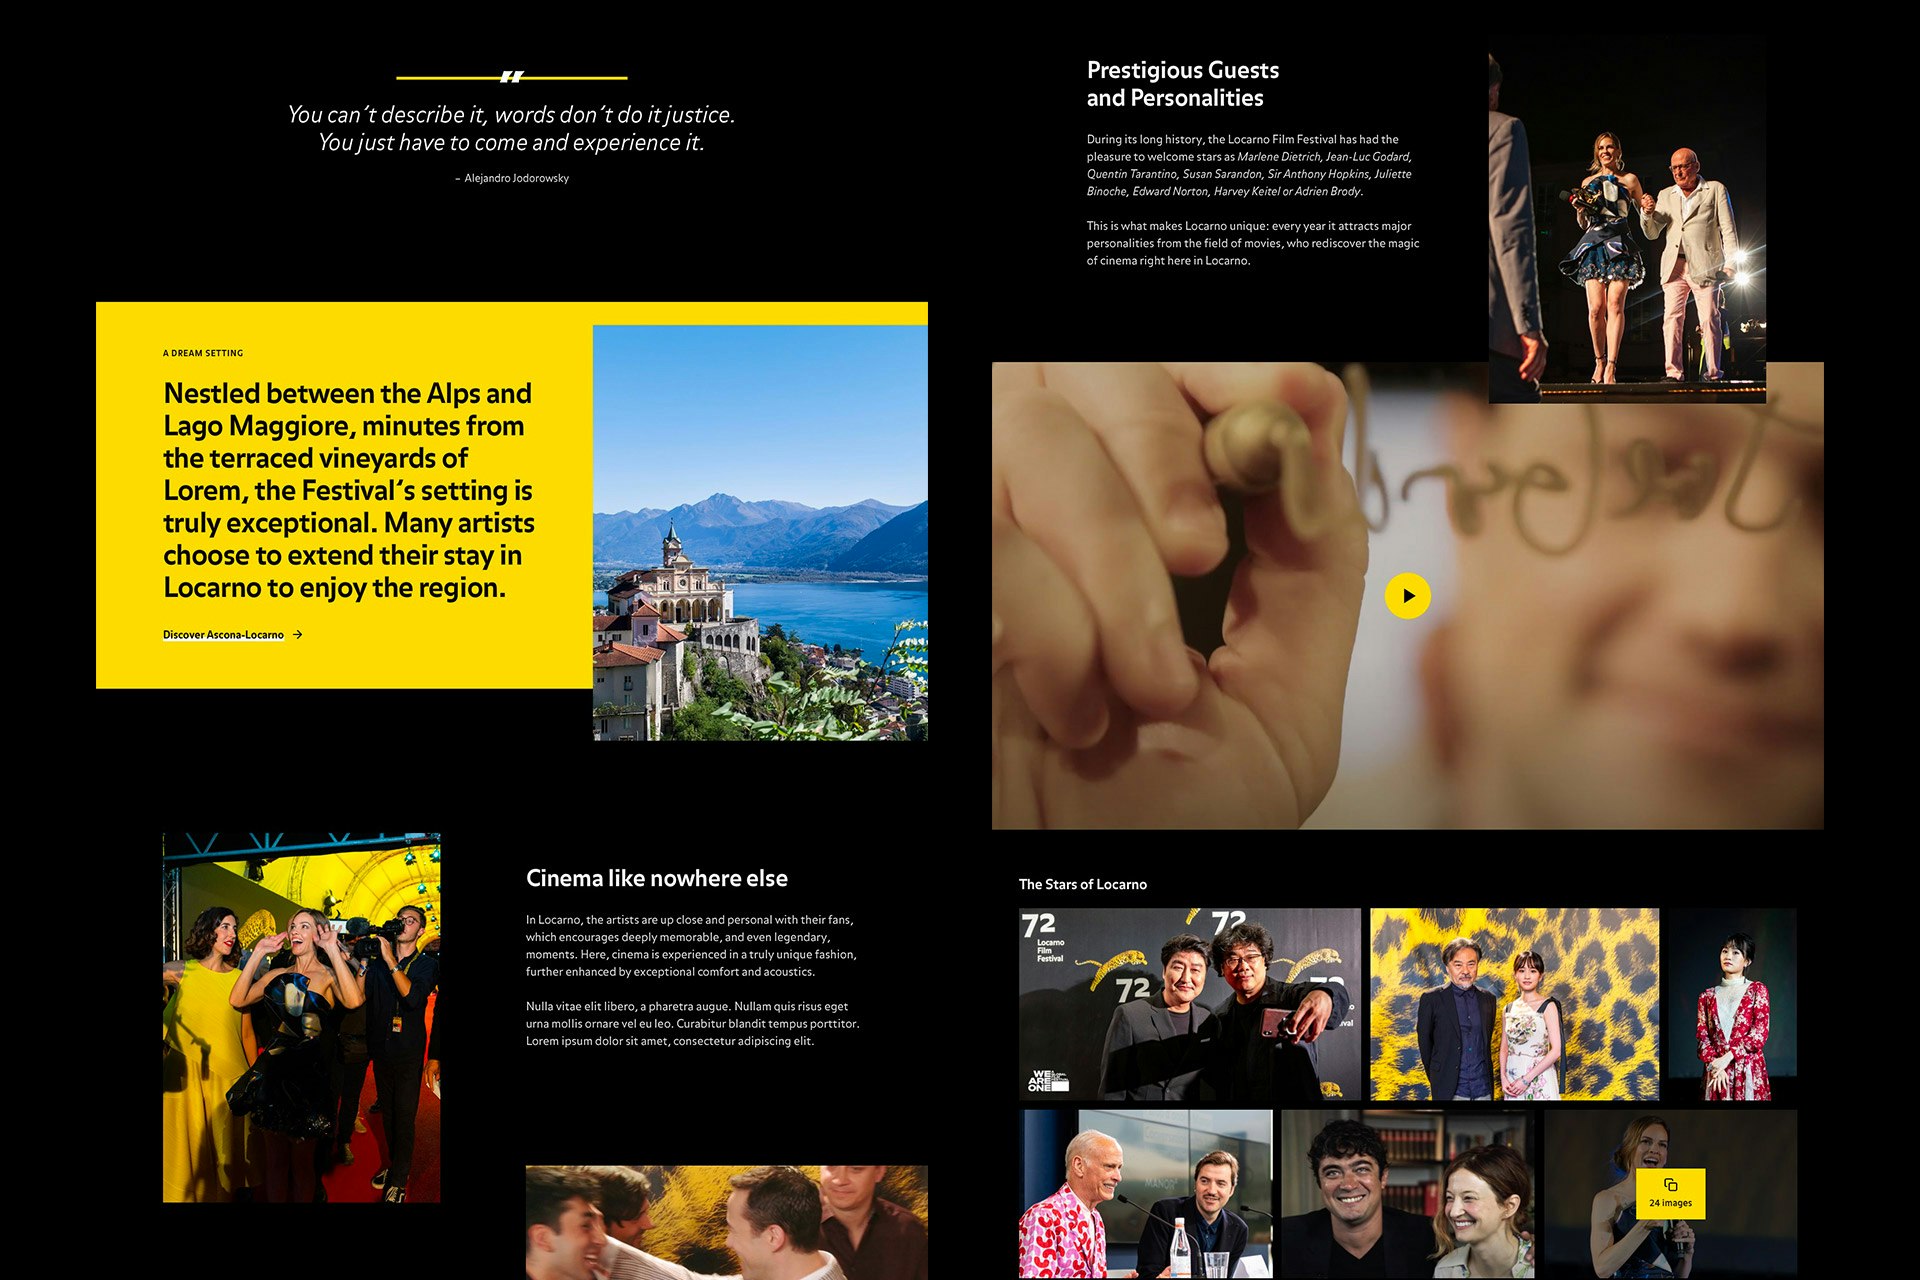 Photo collection during the Locarno Film Festival event